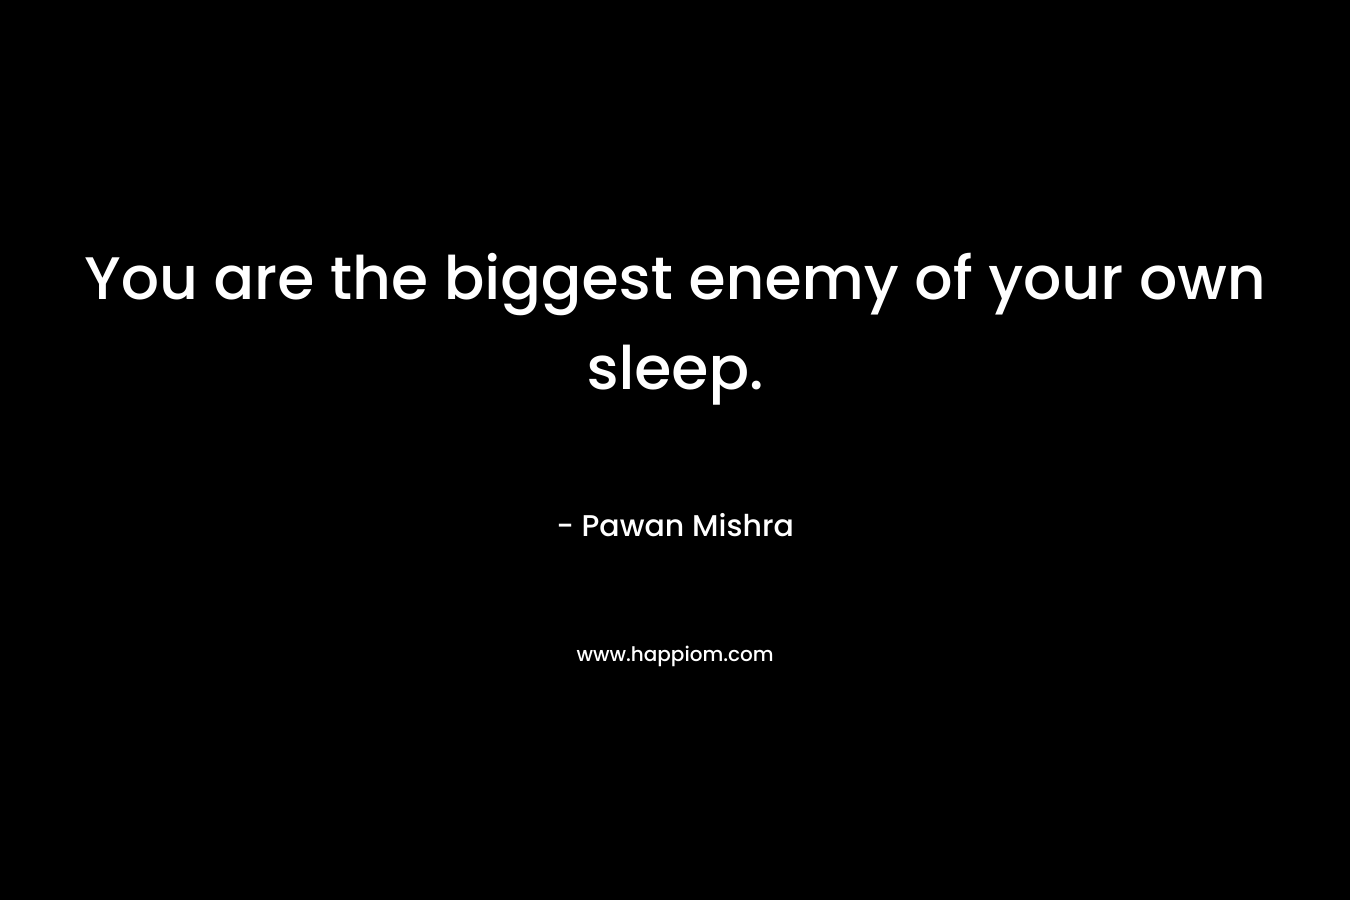 You are the biggest enemy of your own sleep.